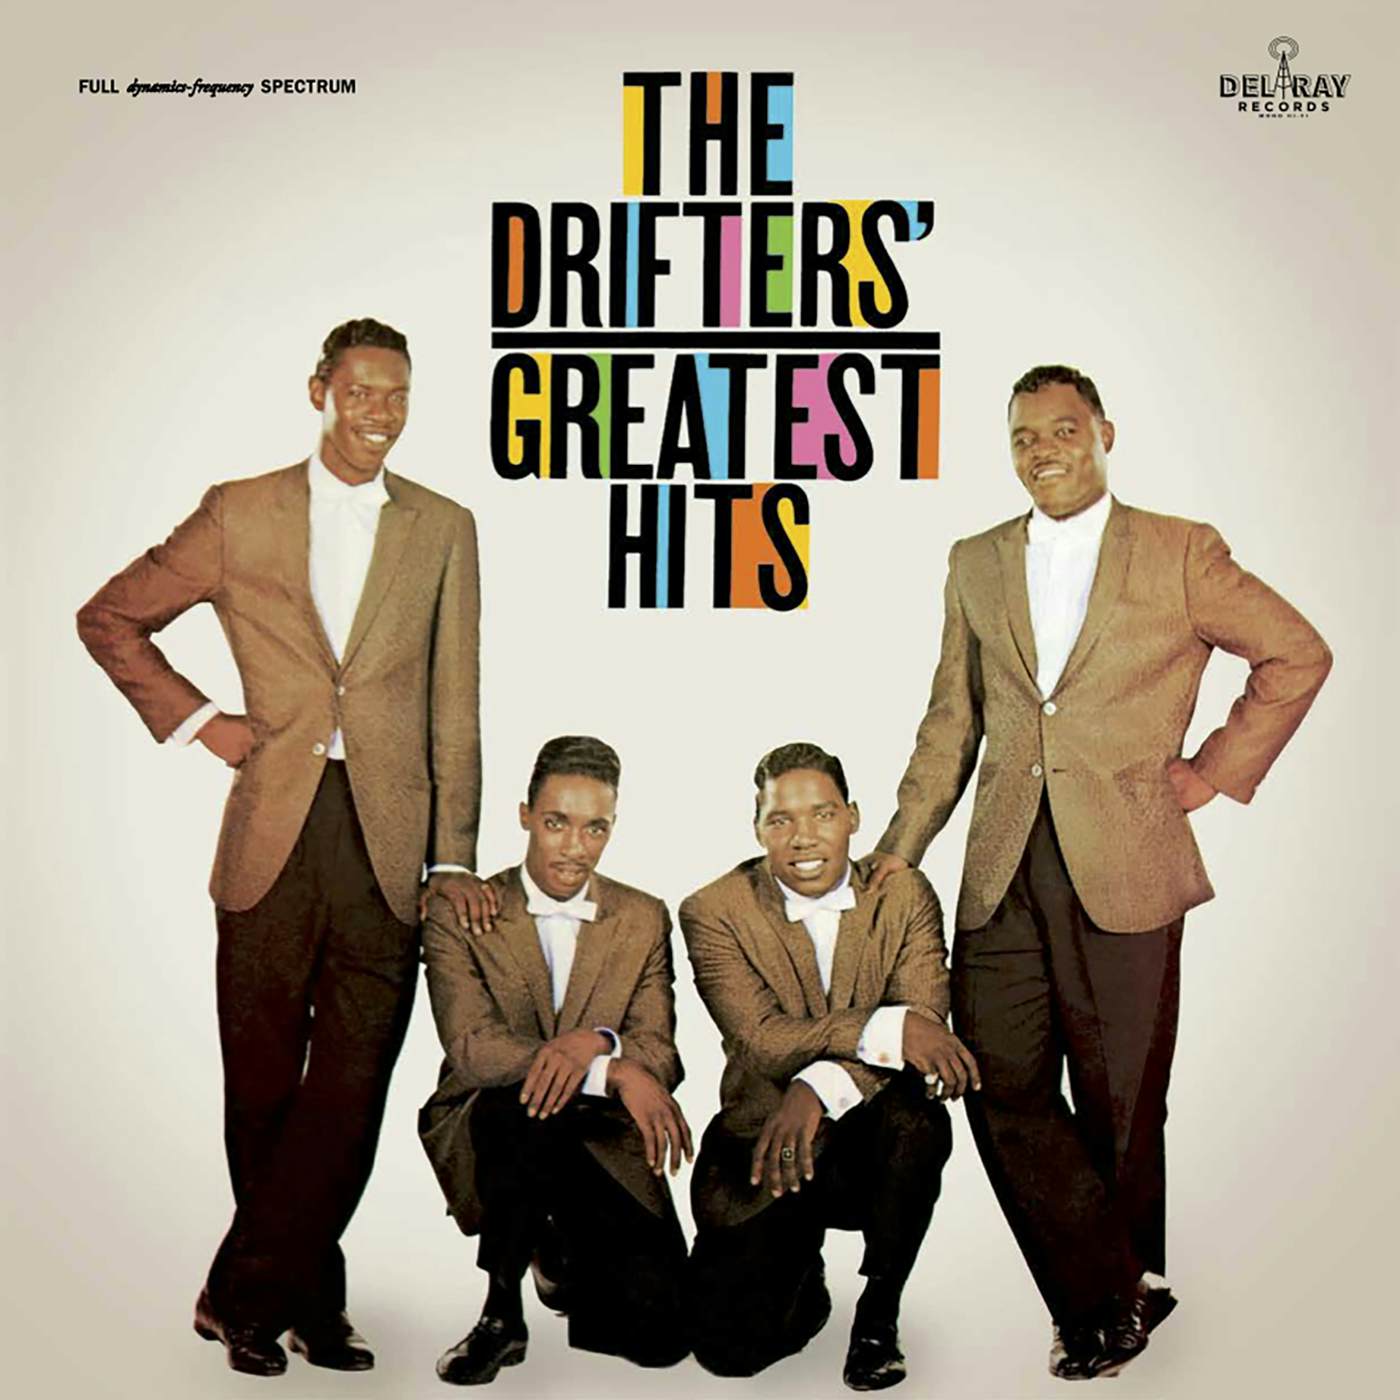 The Drifters' GREATEST HITS Vinyl Record